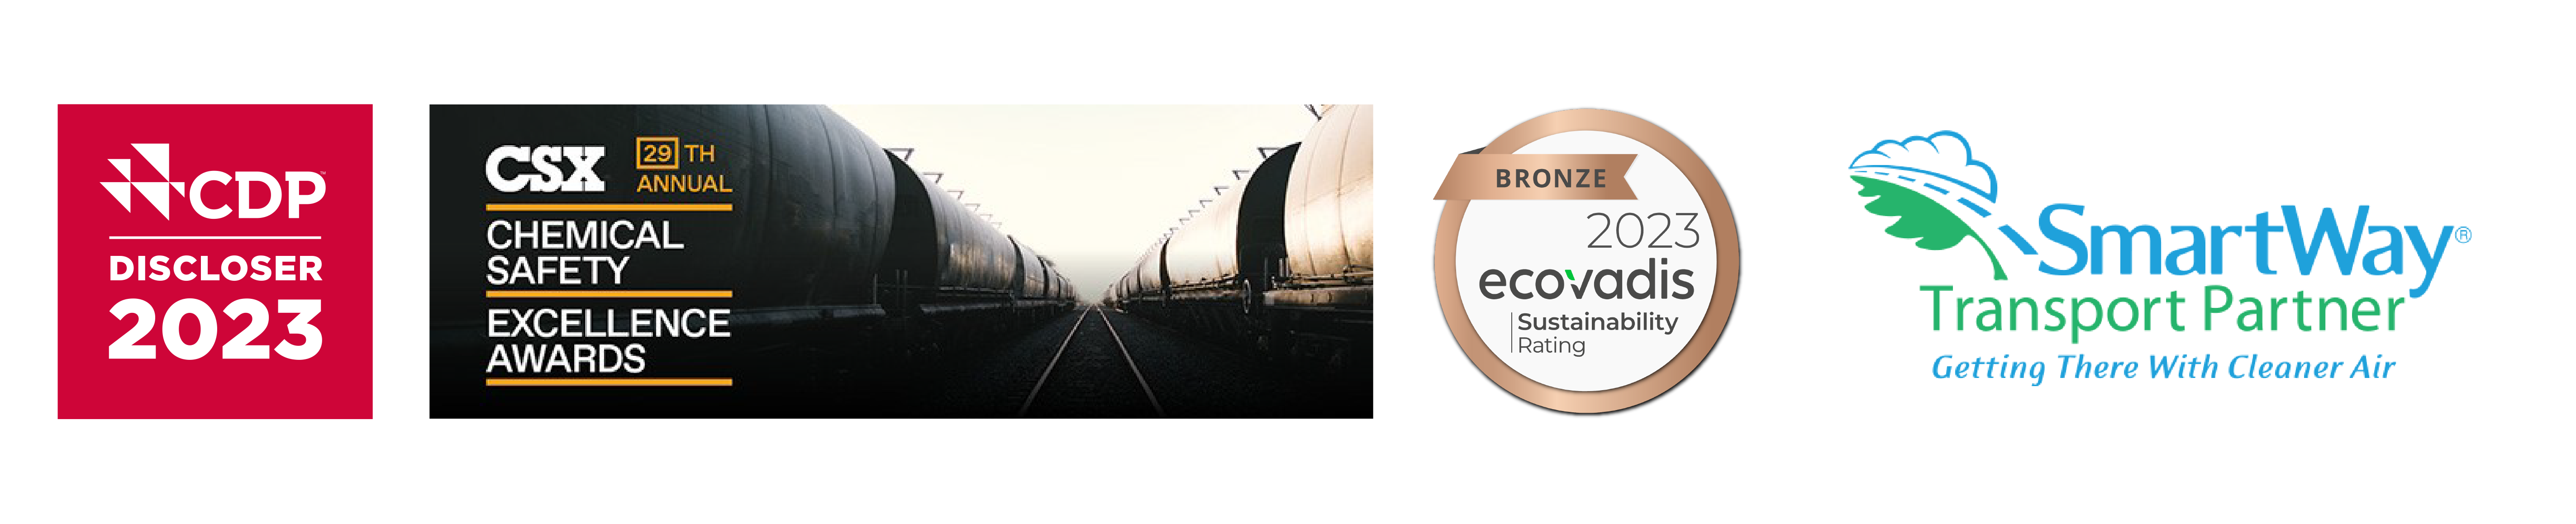 CDP discloser, CSX chemical safety excellence award winner, 2023 ecovadis bronze sustainability rating, SmartWay transport partner